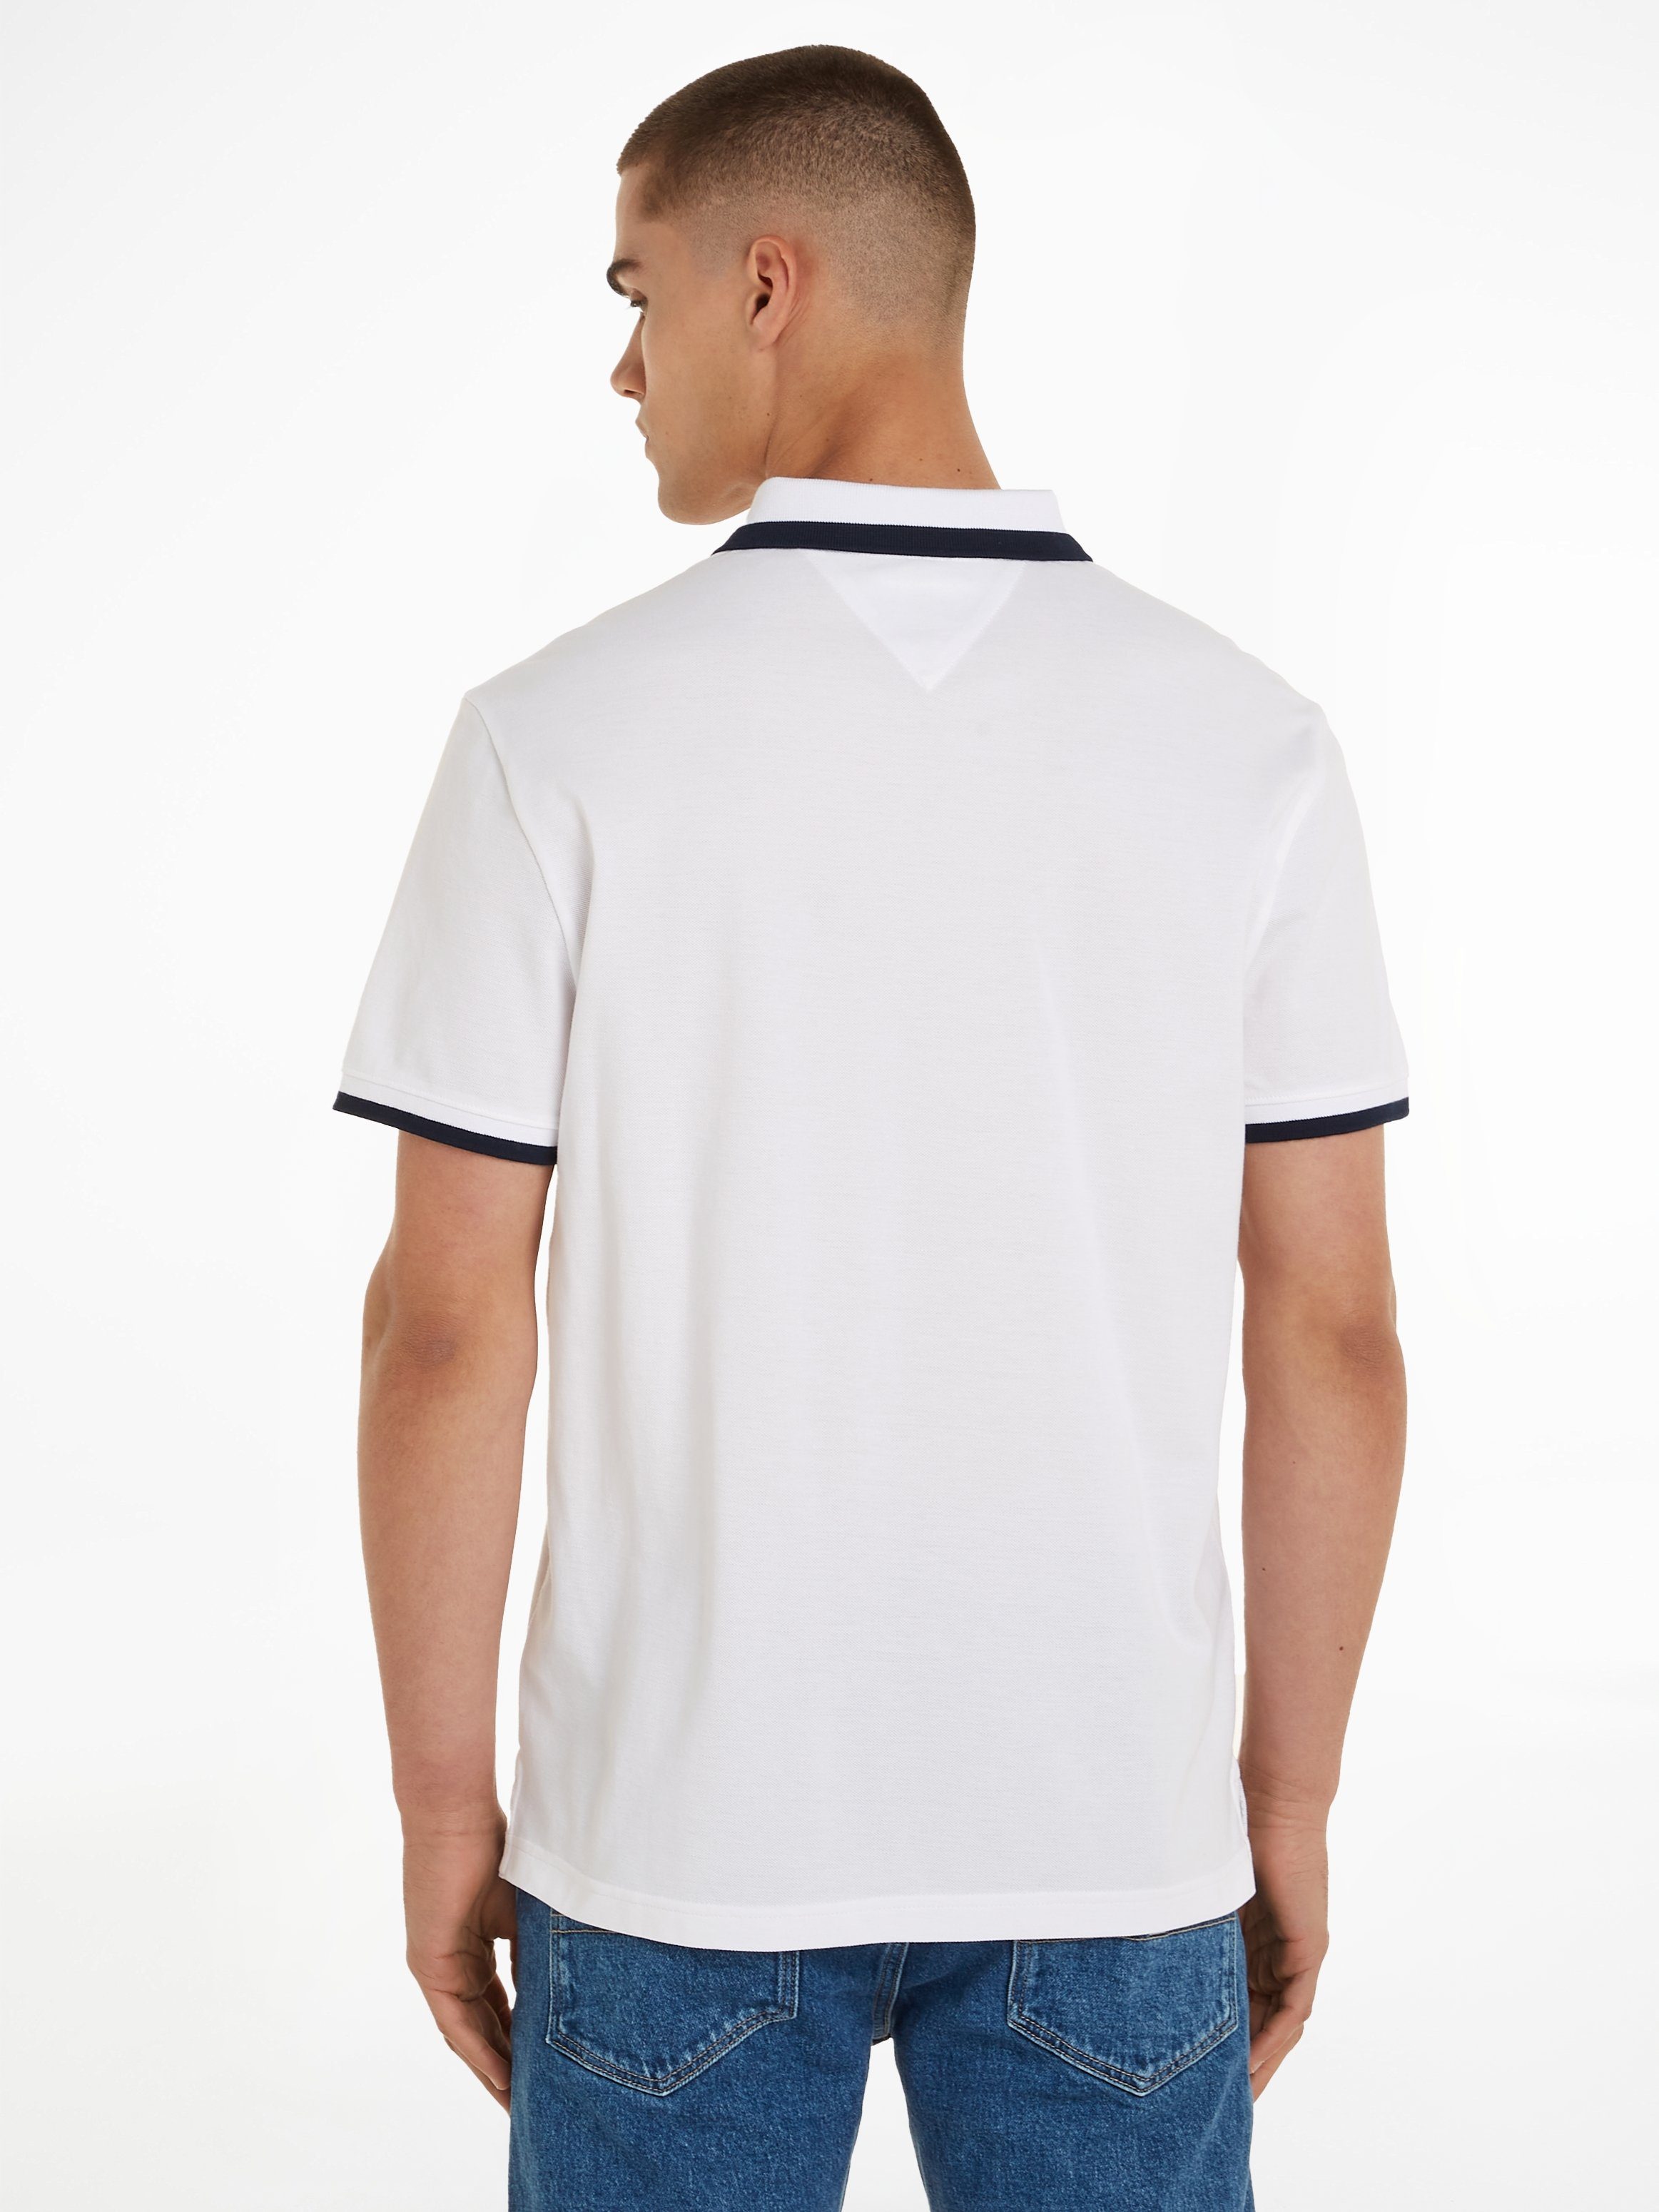 Tommy Jeans REG TJM SOLID Poloshirt White mit Polokragen POLO TIPPED